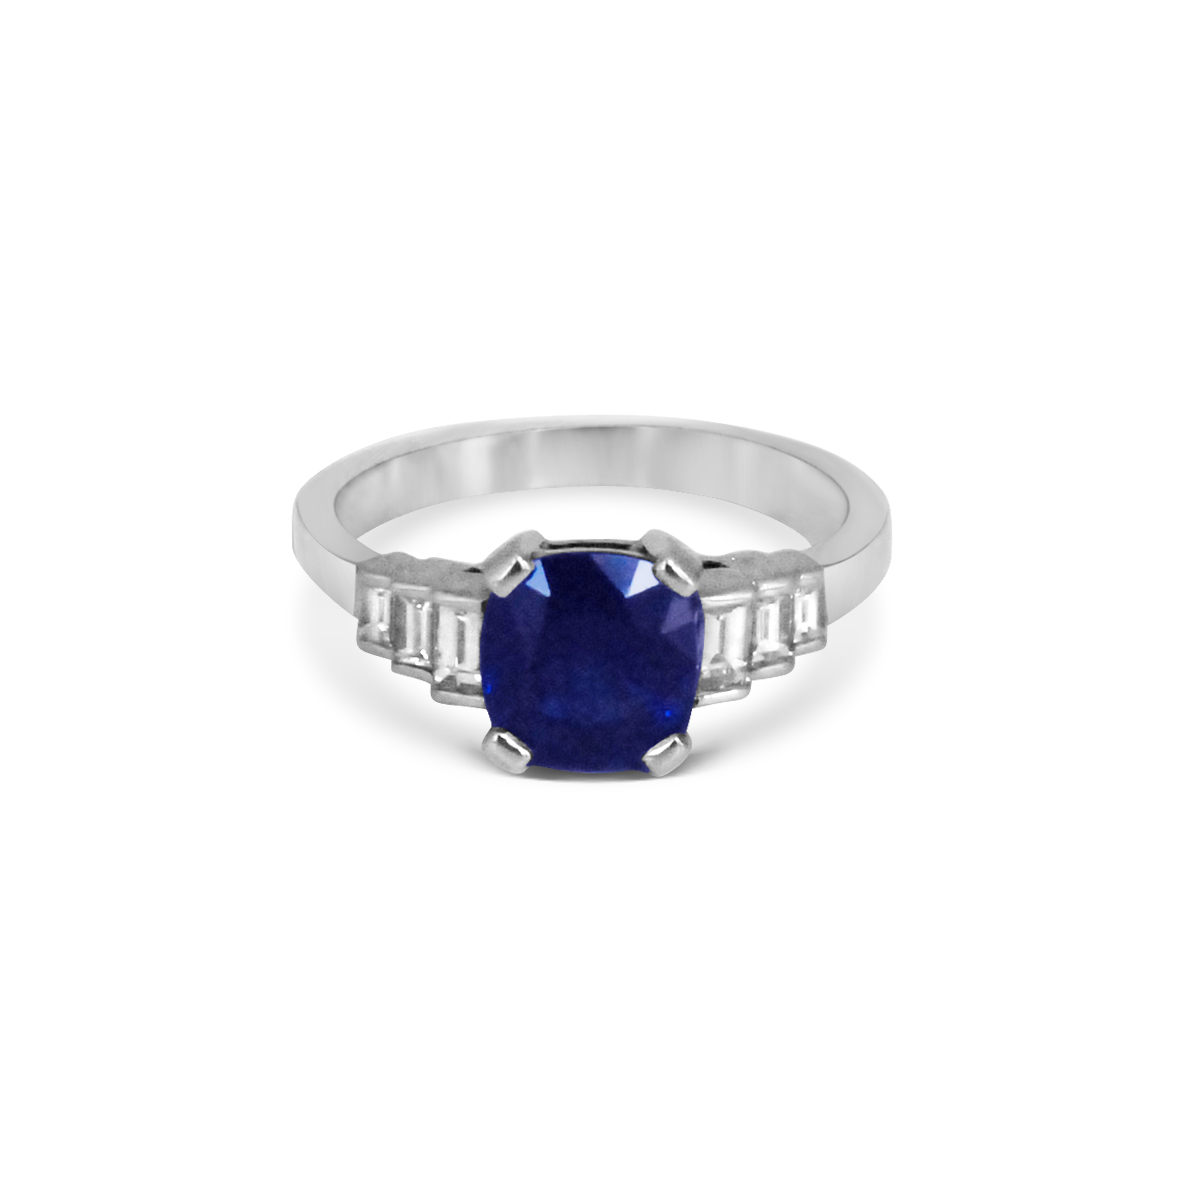 cushion-shaped-sapphire-and-diamond-baguette-cut-ring-mounted-in-platinum-2.jpg